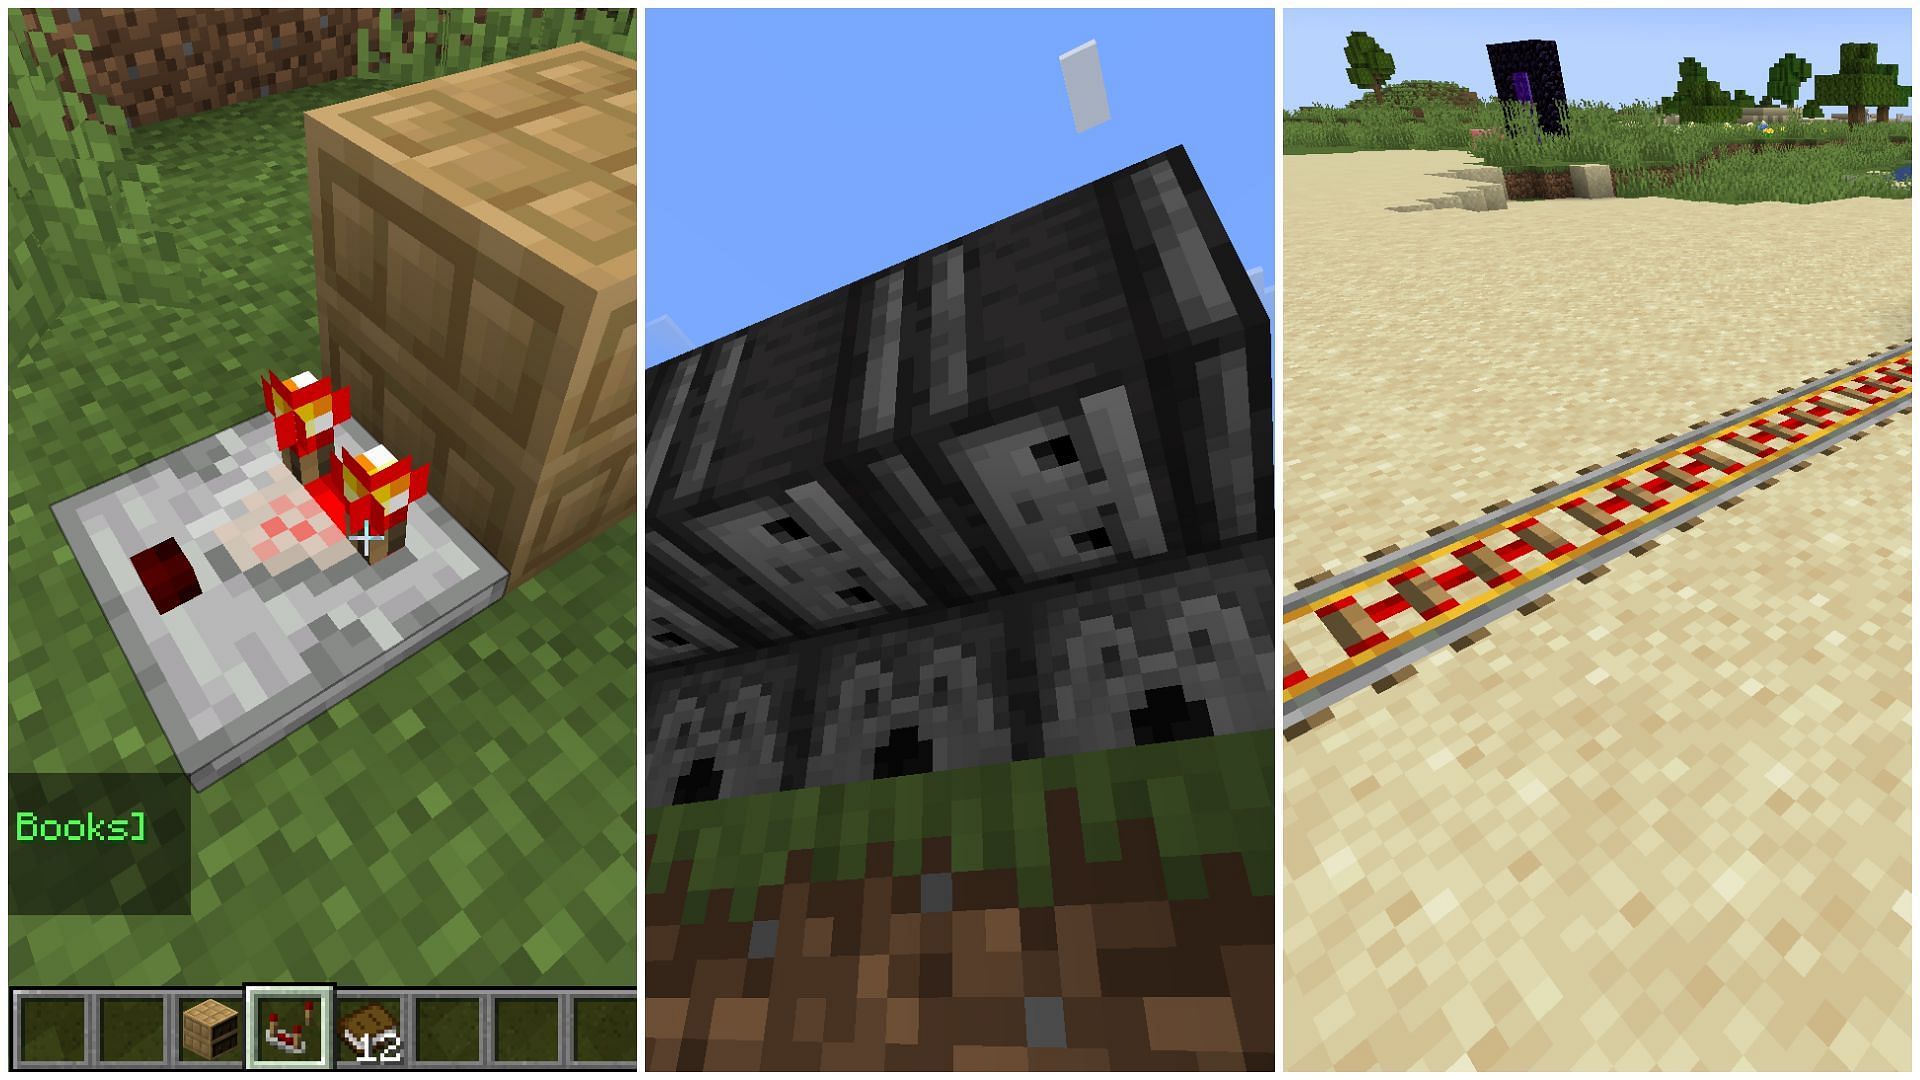 There are many useful redstone items in Minecraft (Image via Sportskeeda)